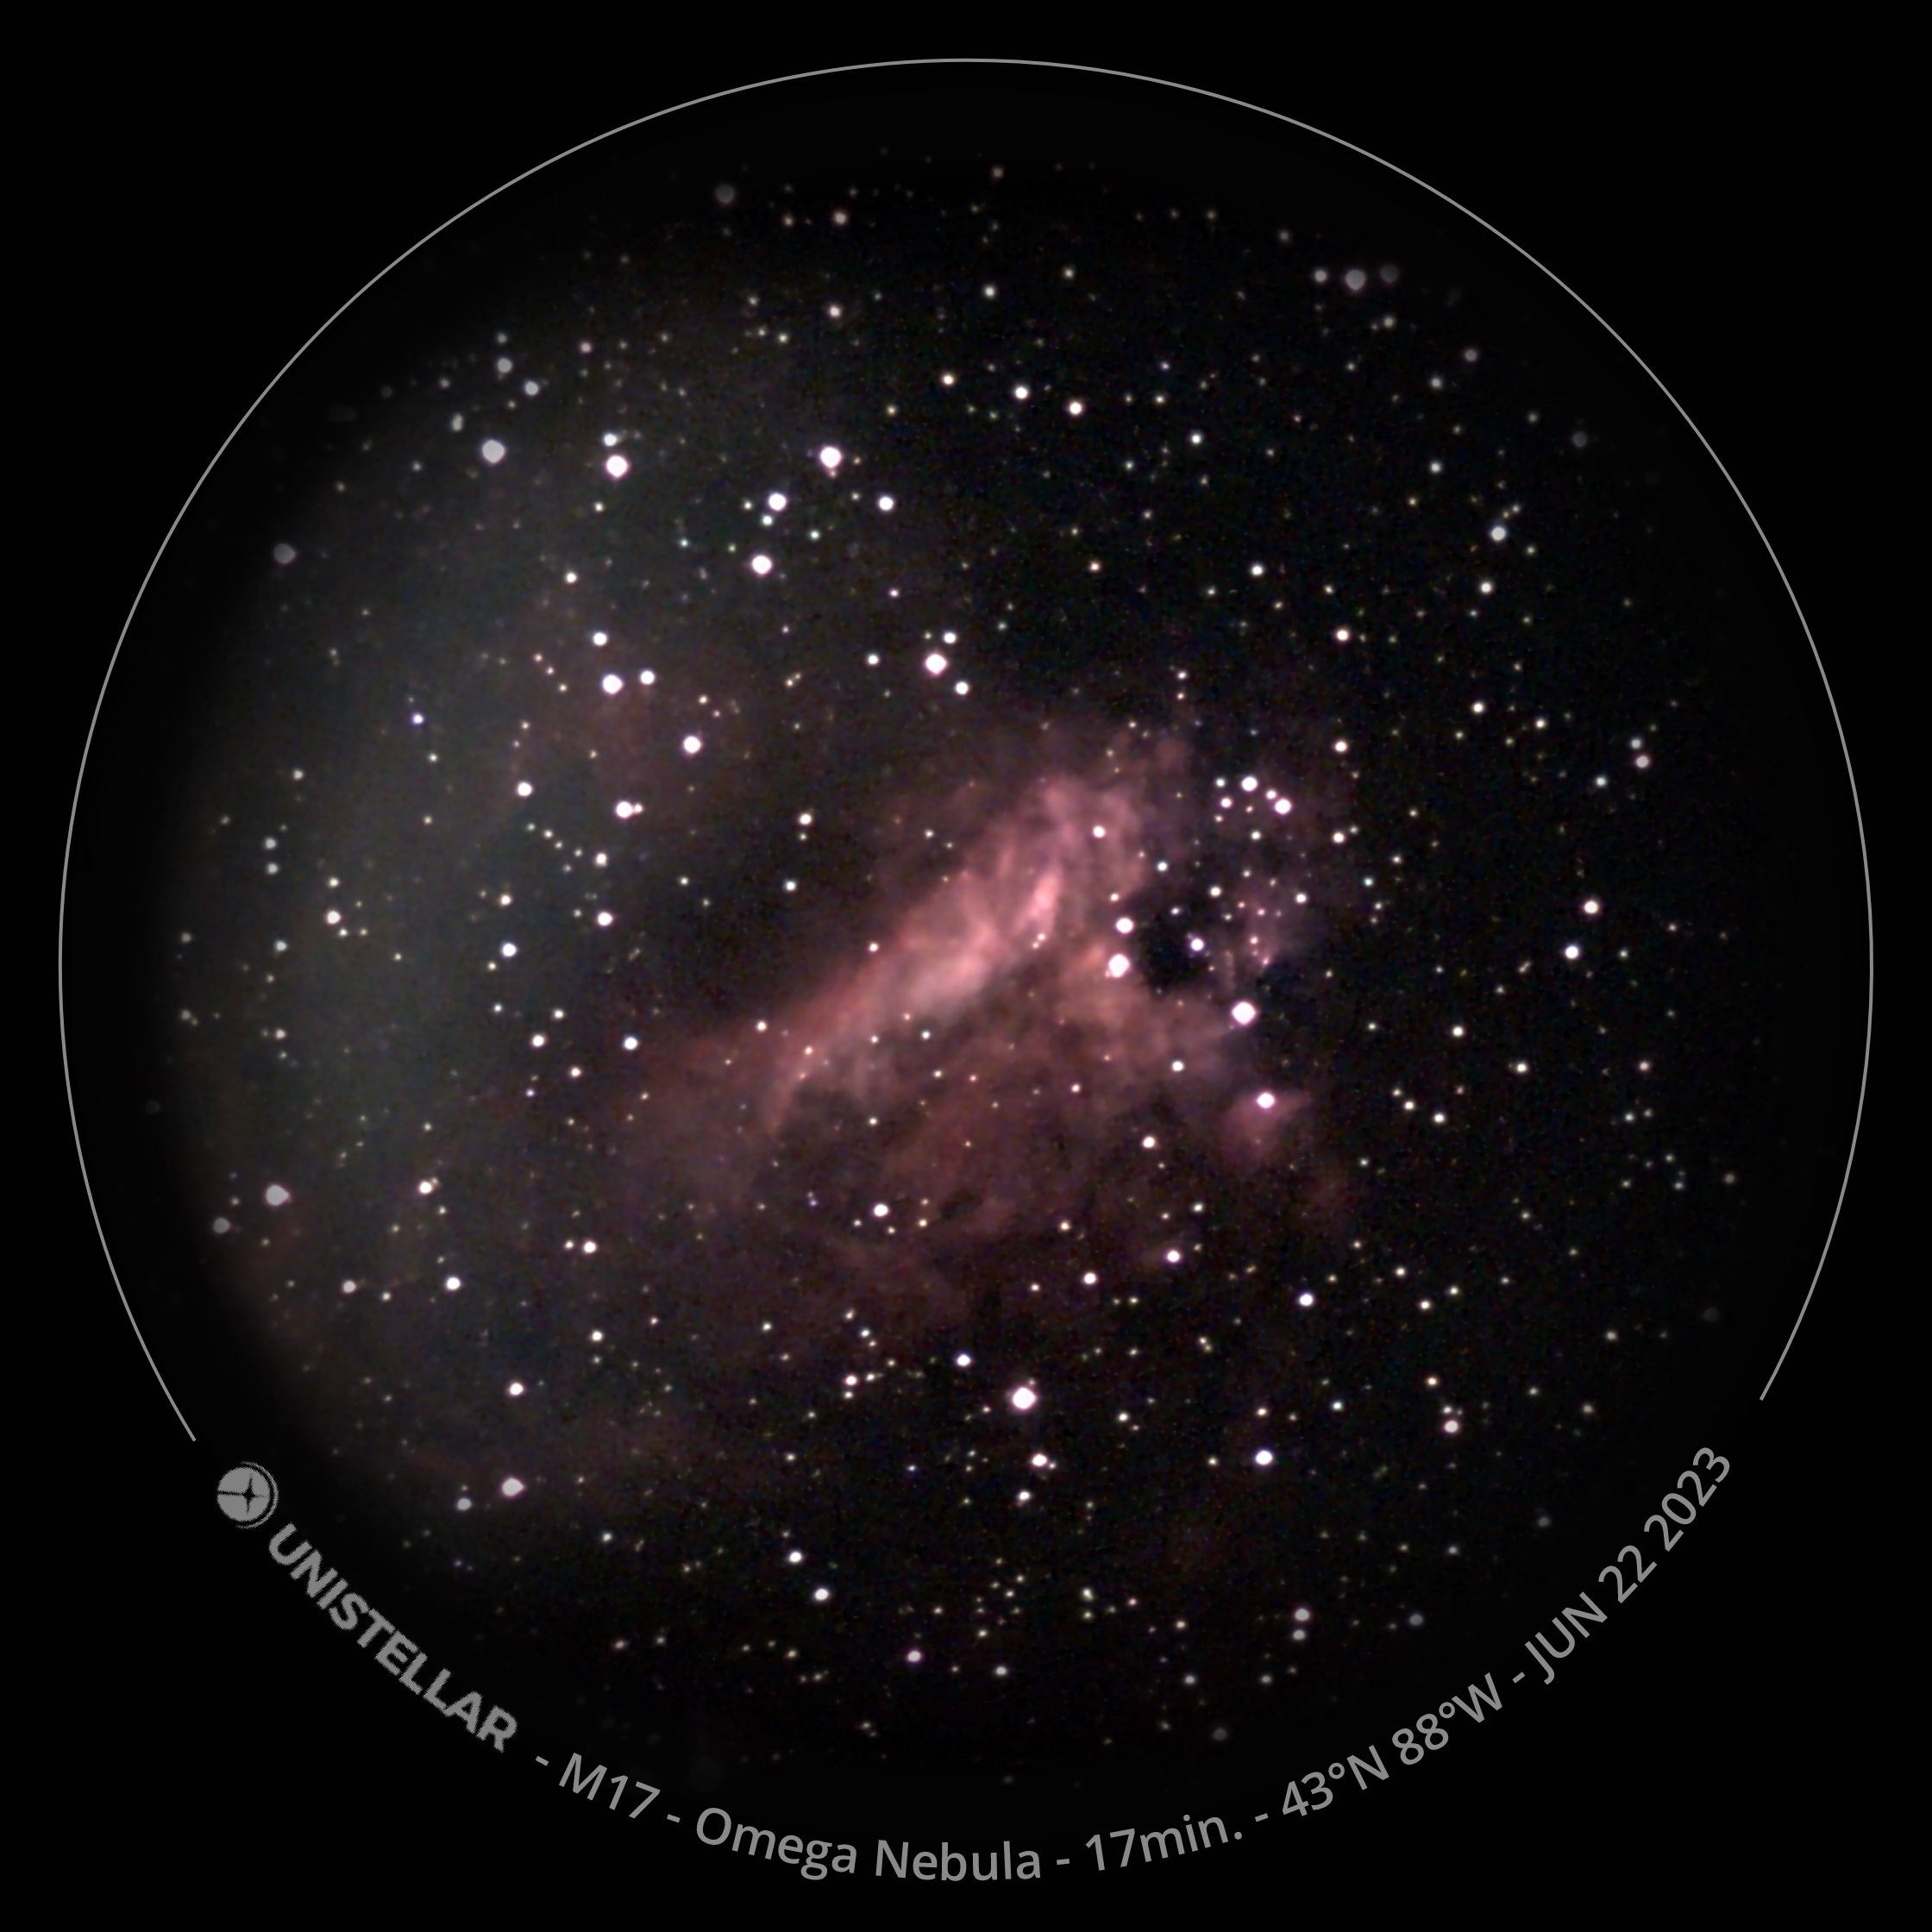 An early look at the Omega Nebula from Bortle 8